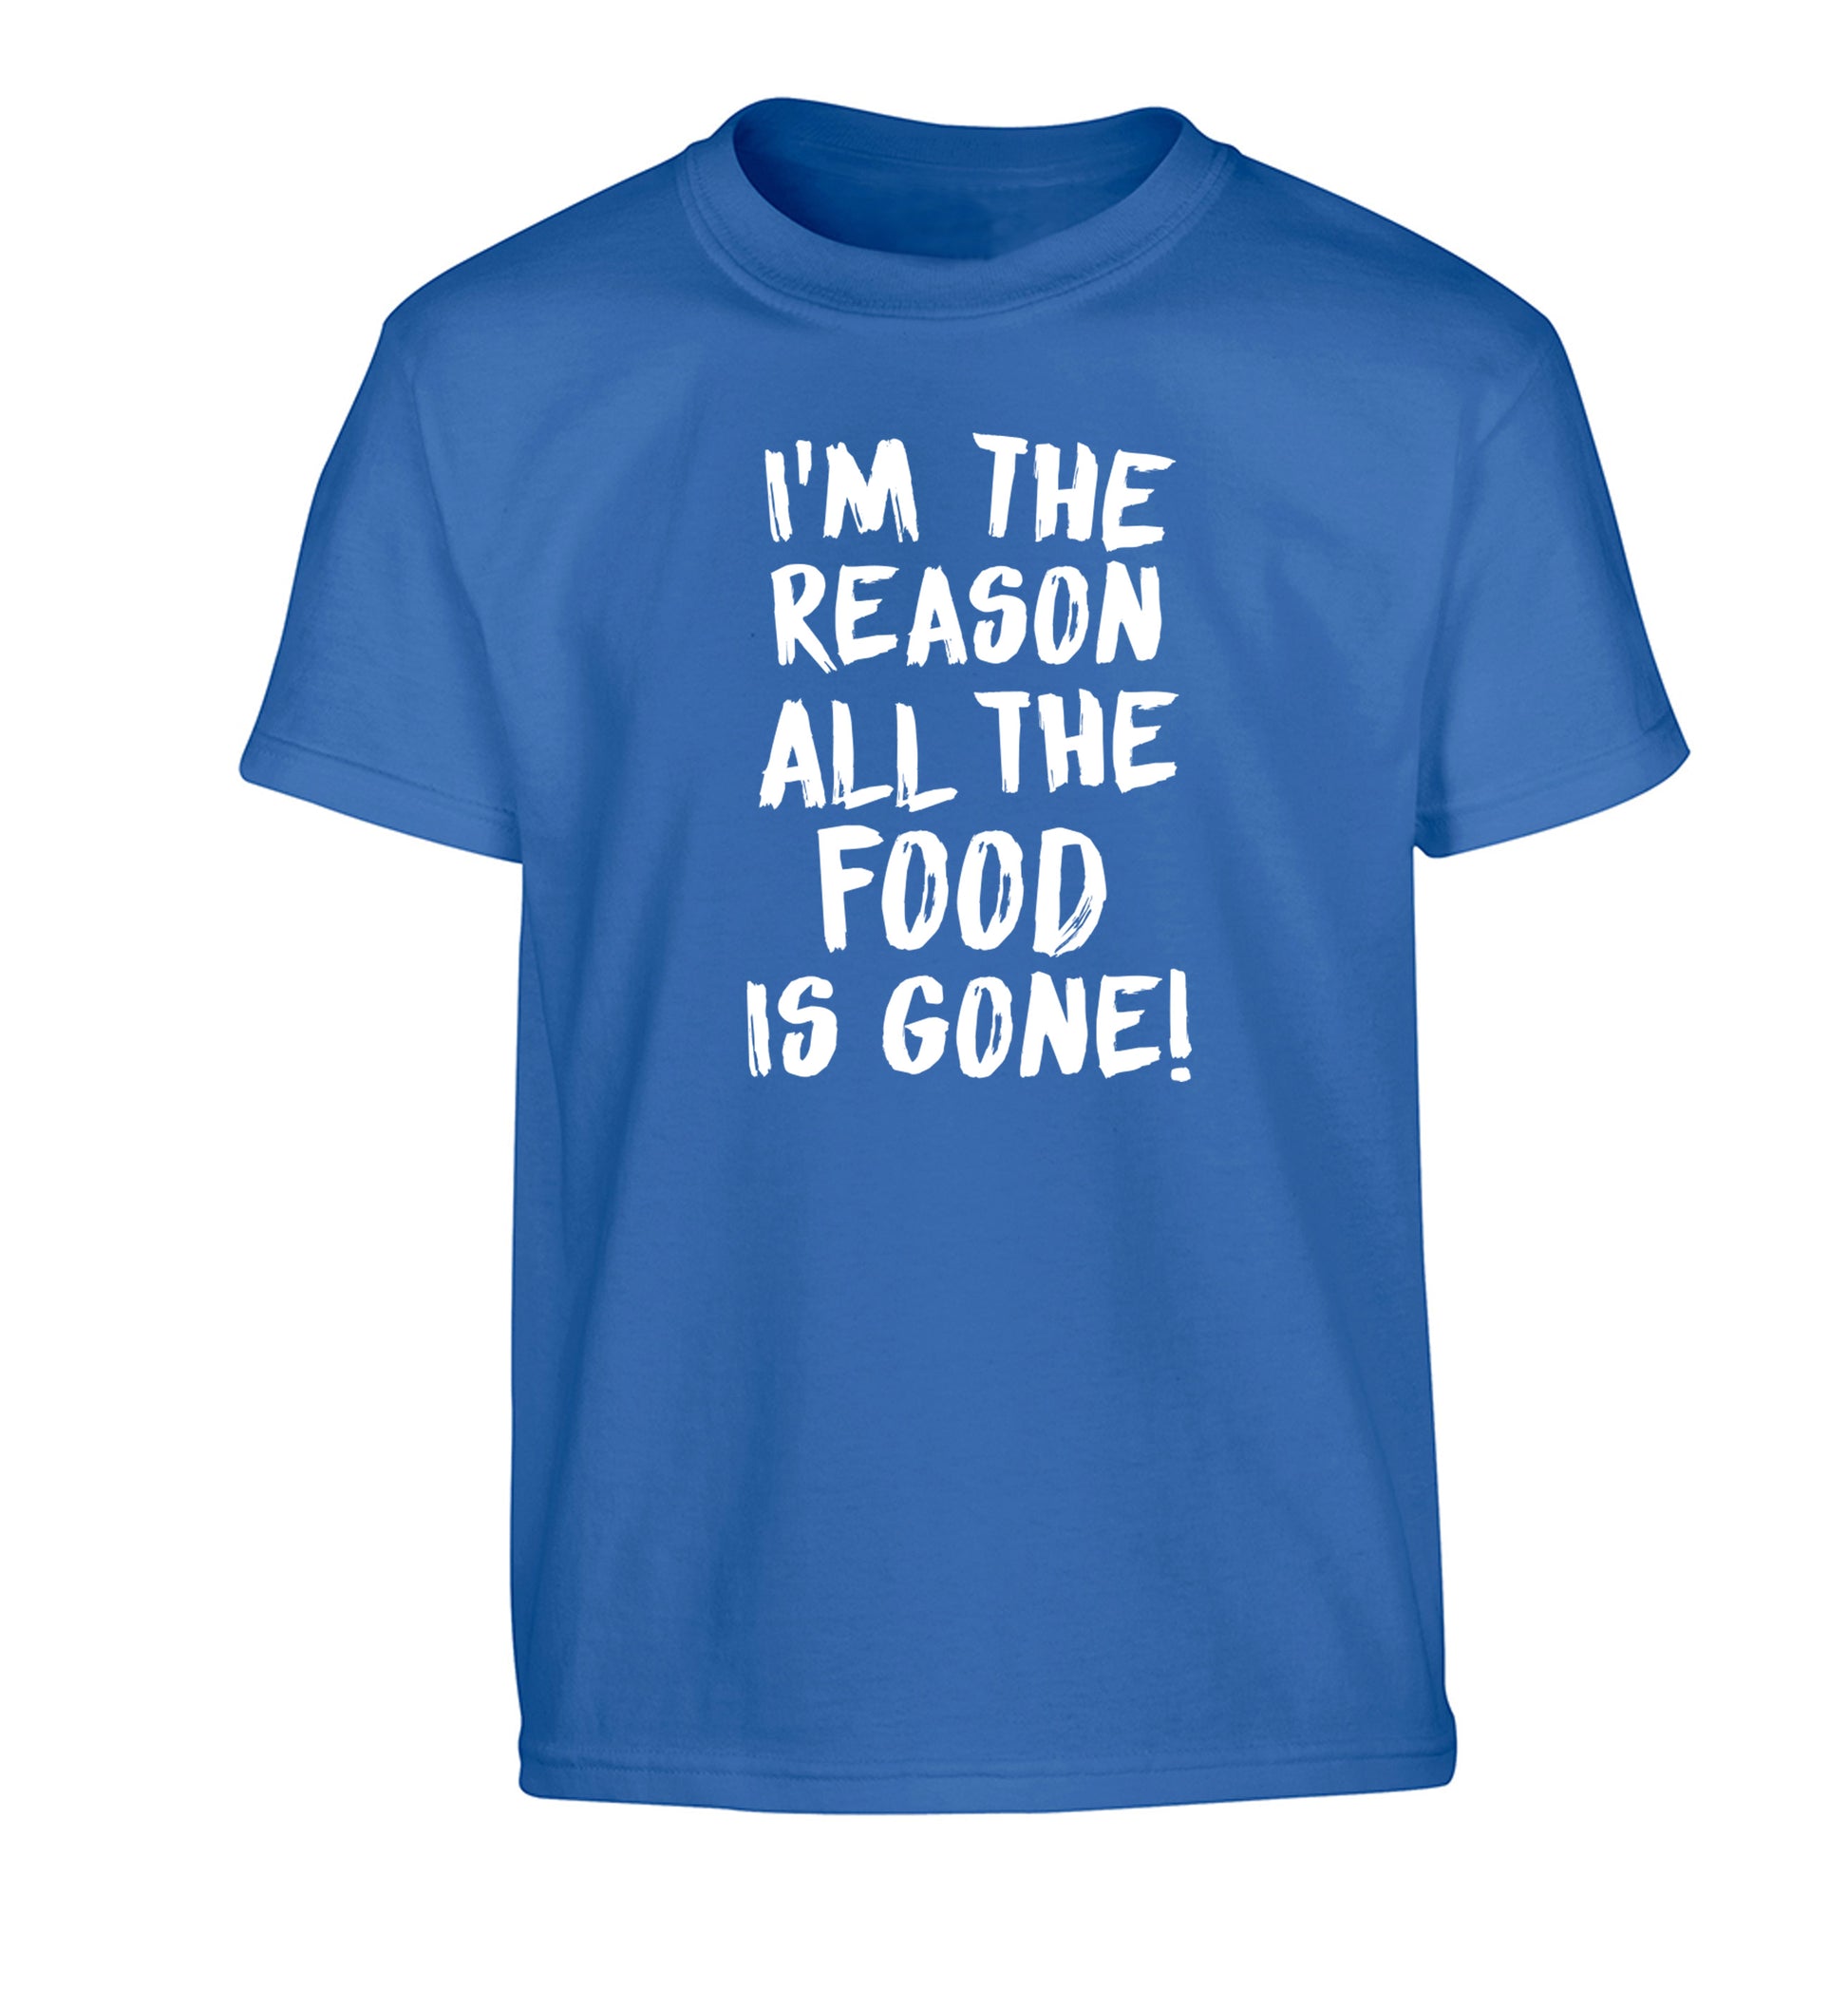 I'm the reason why all the food is gone Children's blue Tshirt 12-13 Years